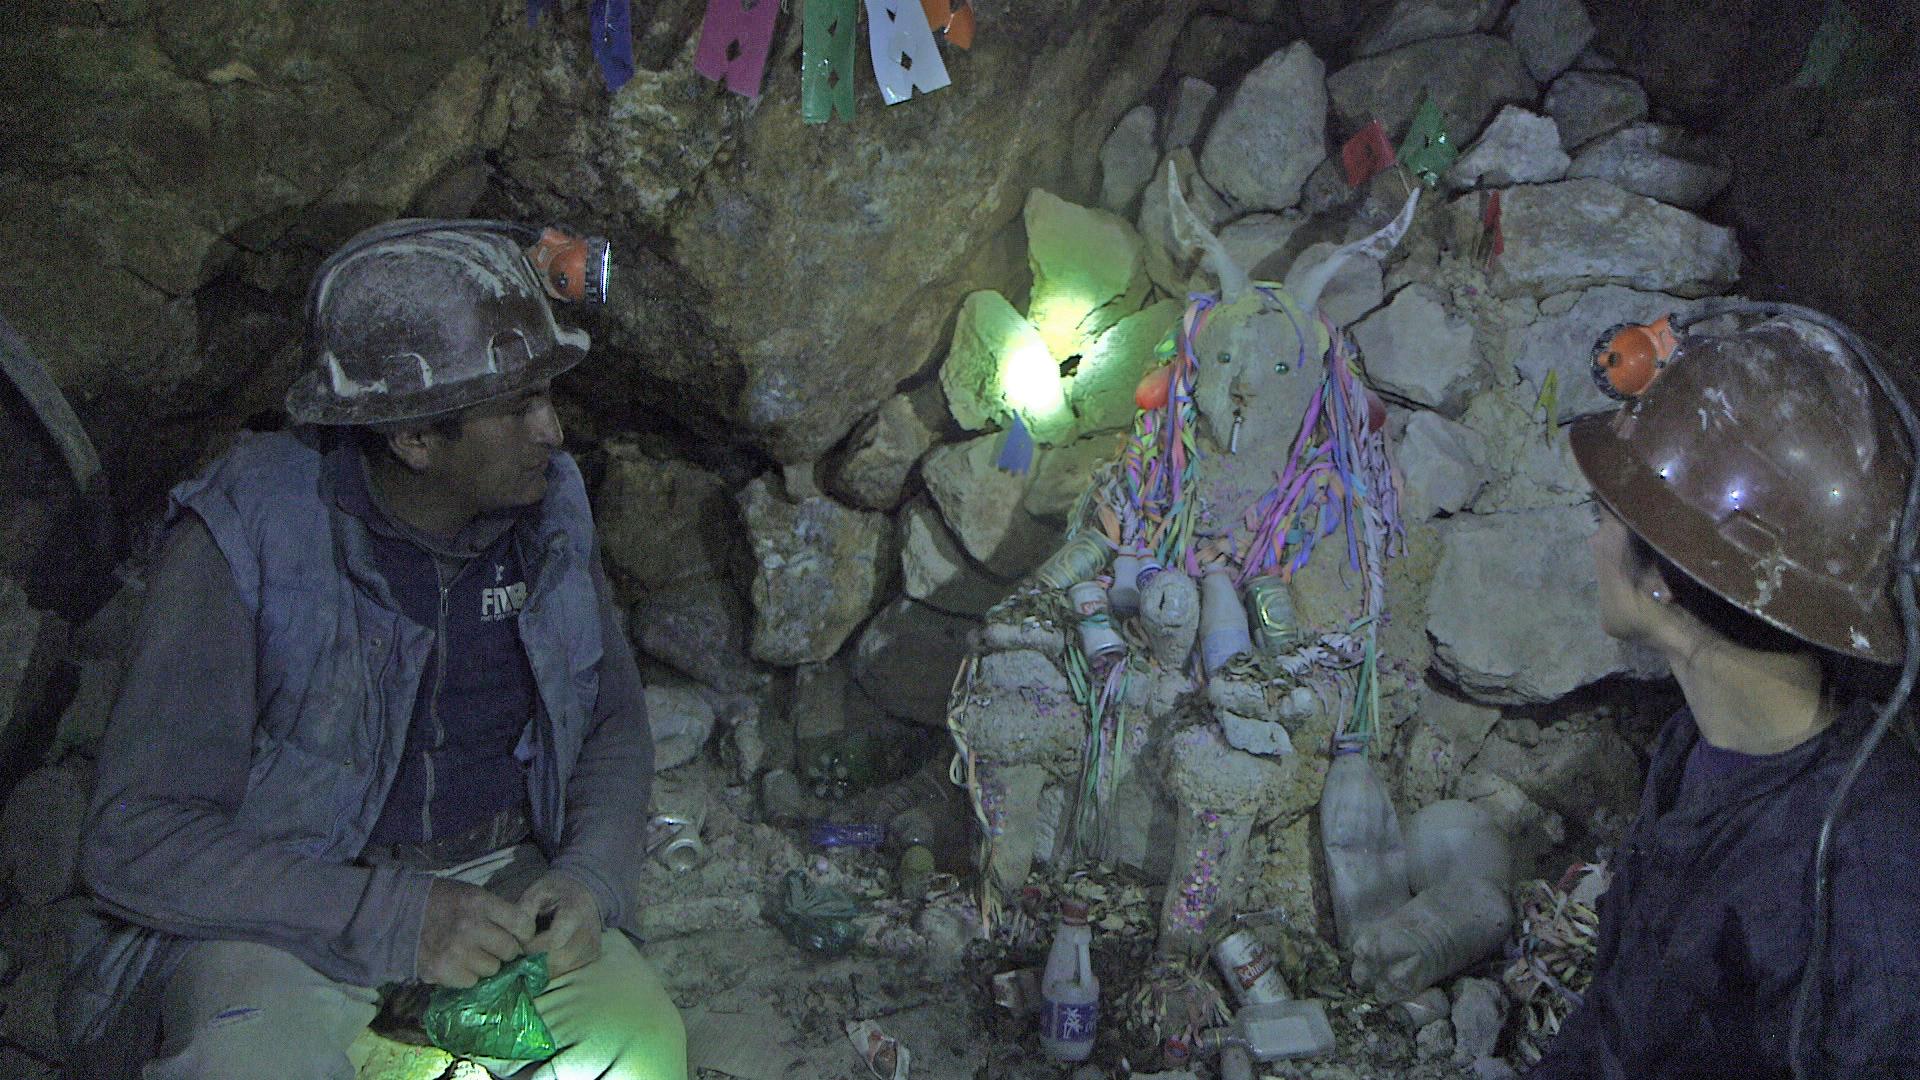 Each Friday, miners at the Cerro Rico mine worship at shrines of "El Tio," the spirit who they also call th "Devil God of the Mountain."